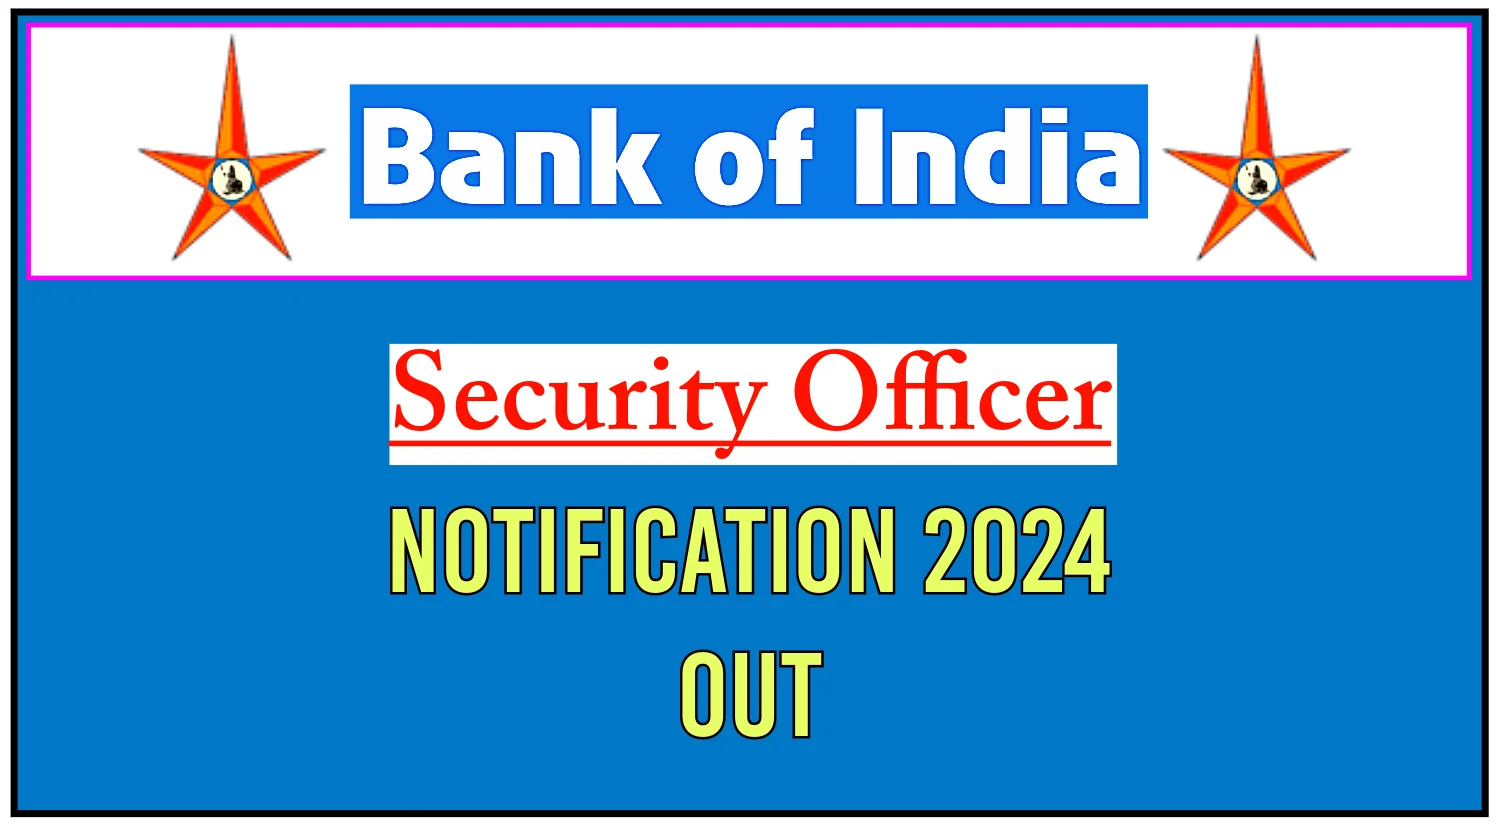 Bank of India (BOI) Recruitment 2024 Notification Out for Security Officer